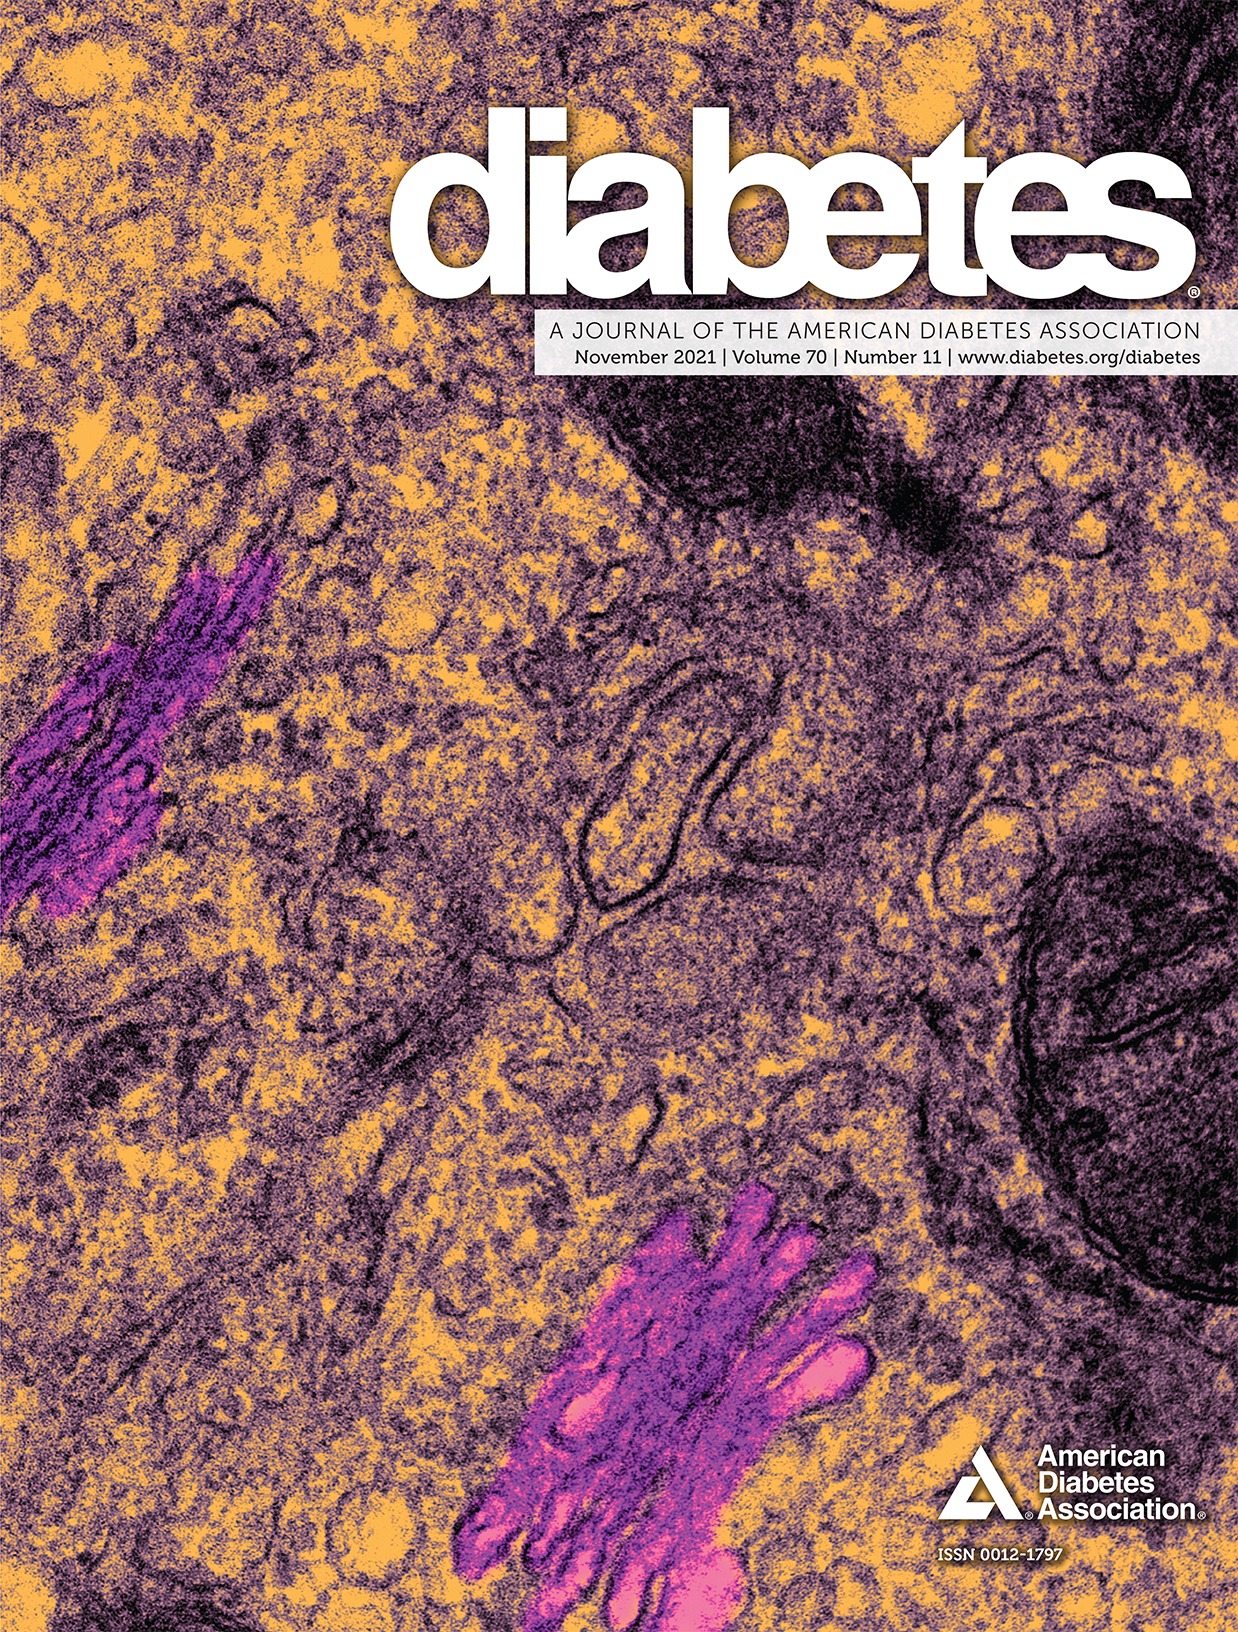 Mineralocorticoid Receptor Pathway and Its Antagonism in a Model of Diabetic Retinopathy